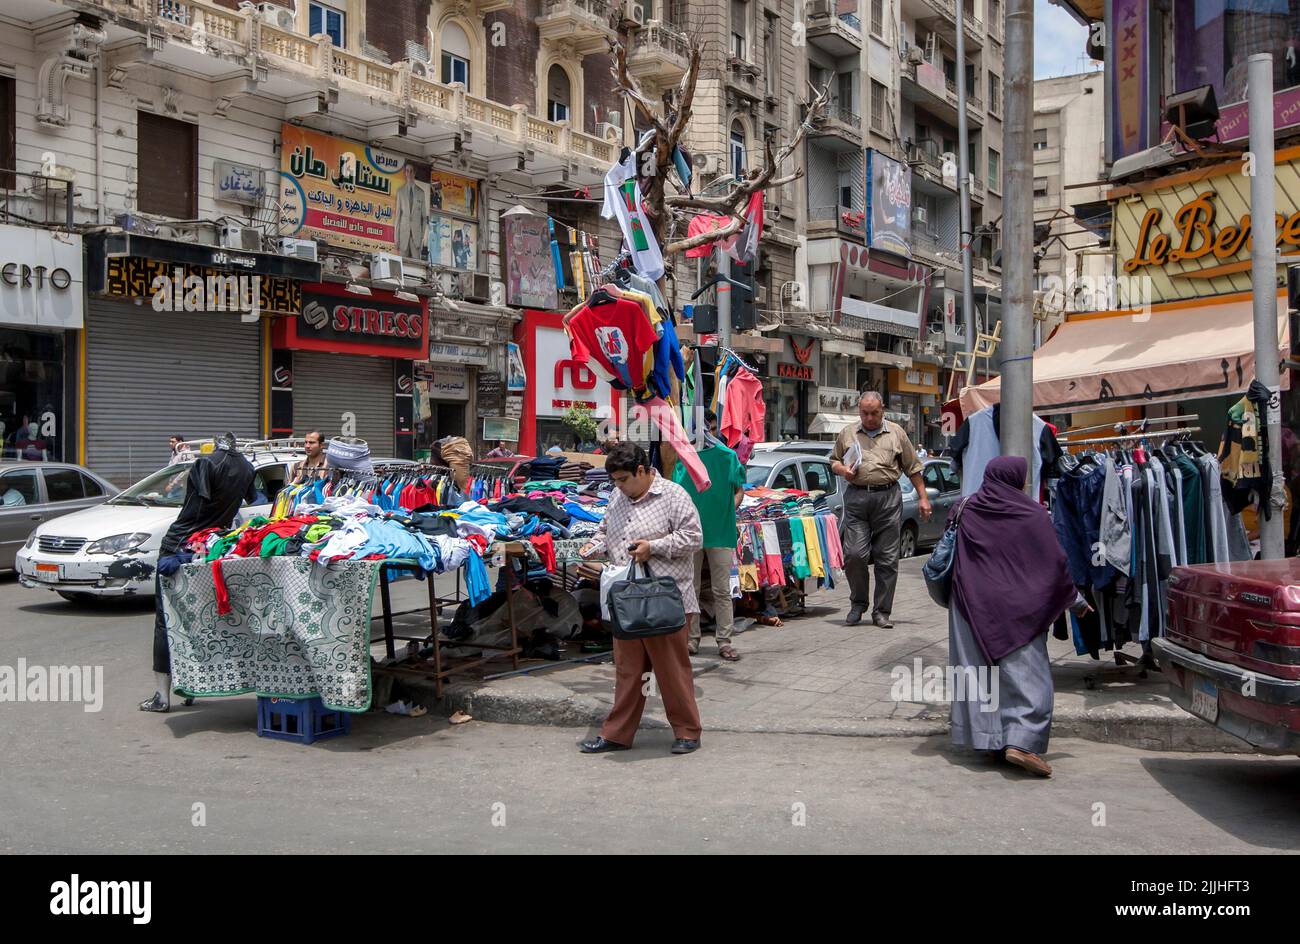 A busy street scene including a sidewalk stall selling textiles located in downtown Cairo in Egypt. Stock Photo